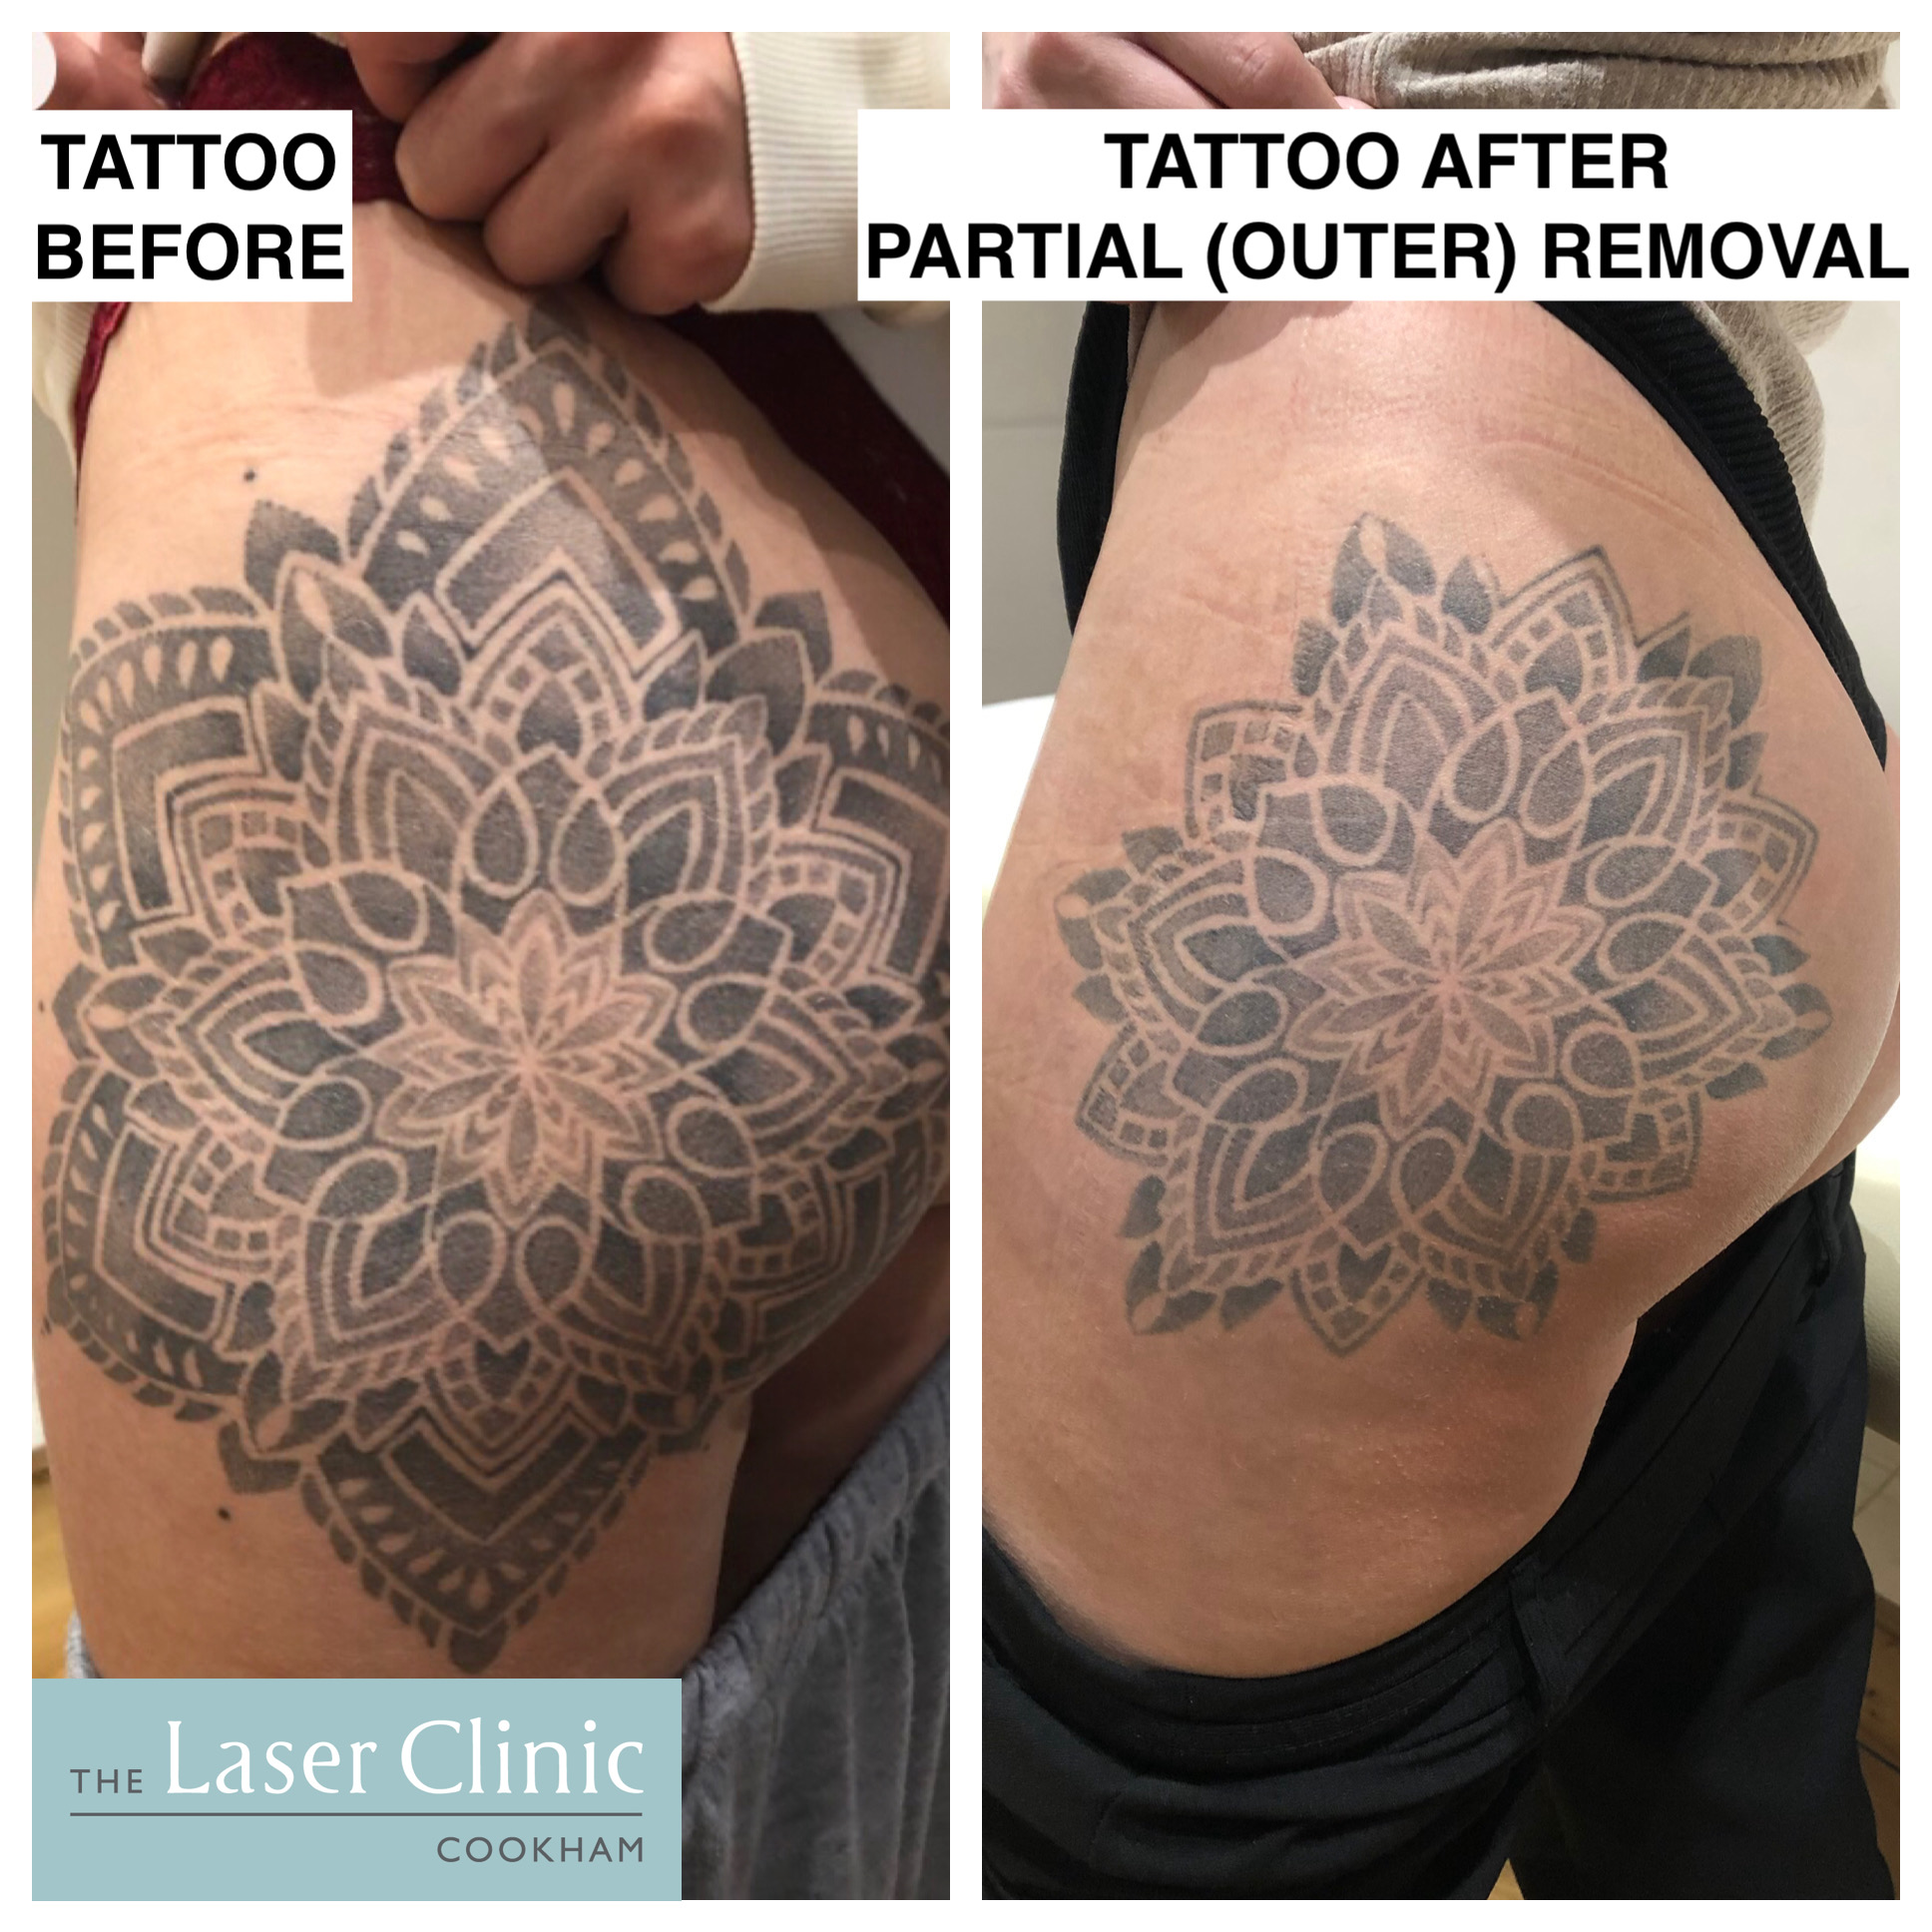 Ink Illusions - LASER TATTOO REMOVAL Before Straight afternoon patch test 2  hours after For a patch test this is a great result after 2 hours - the ink  is almost gone!